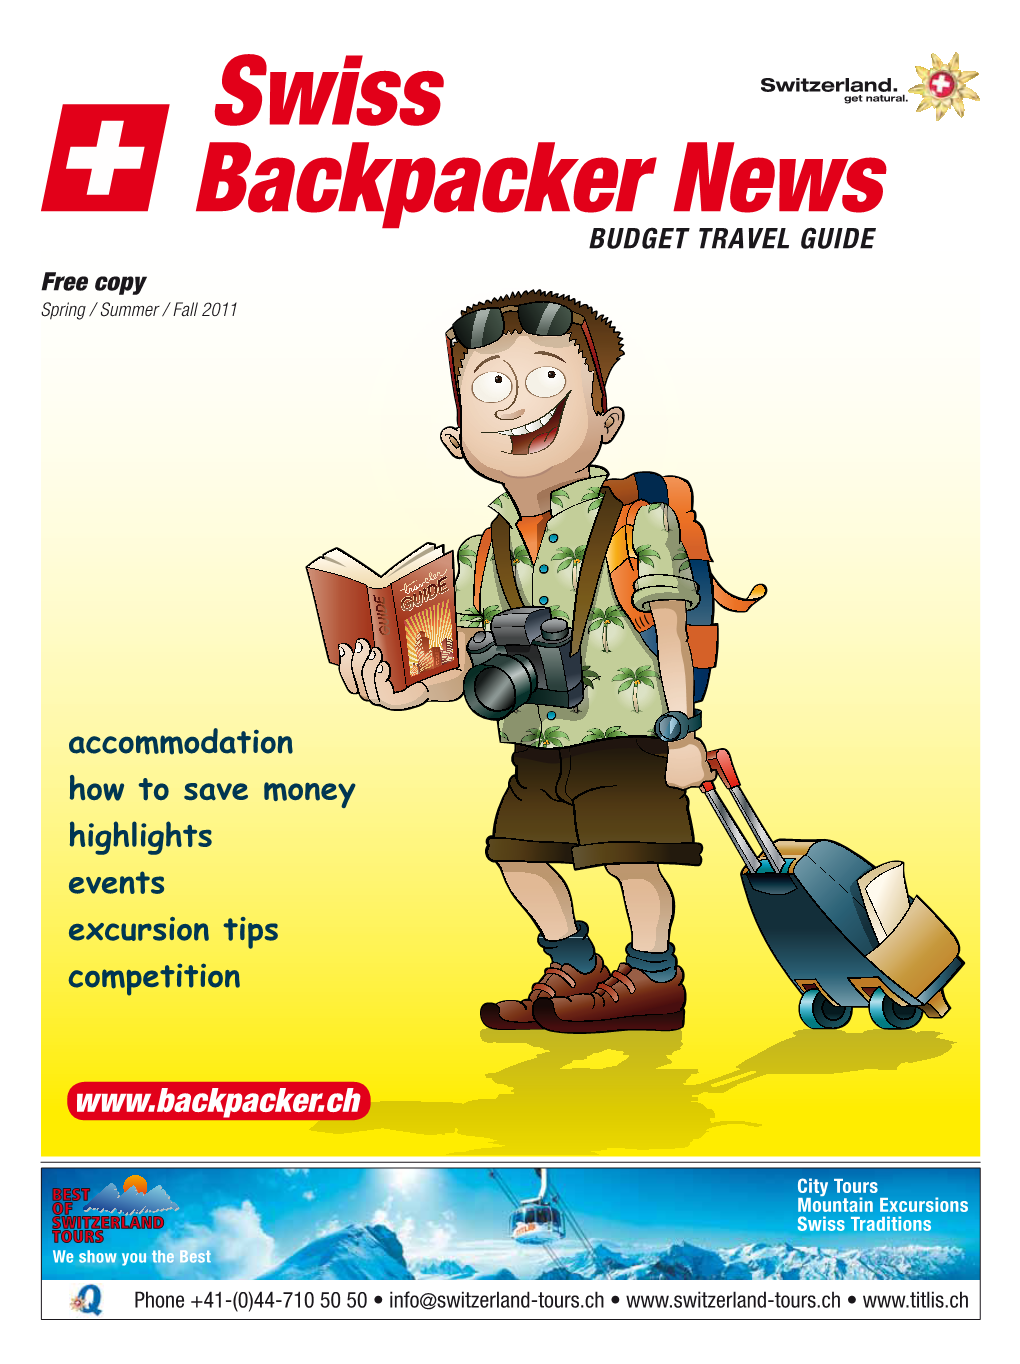 Swiss Backpacker News Budget Travel Guide Free Copy Spring / Summer / Fall 2011